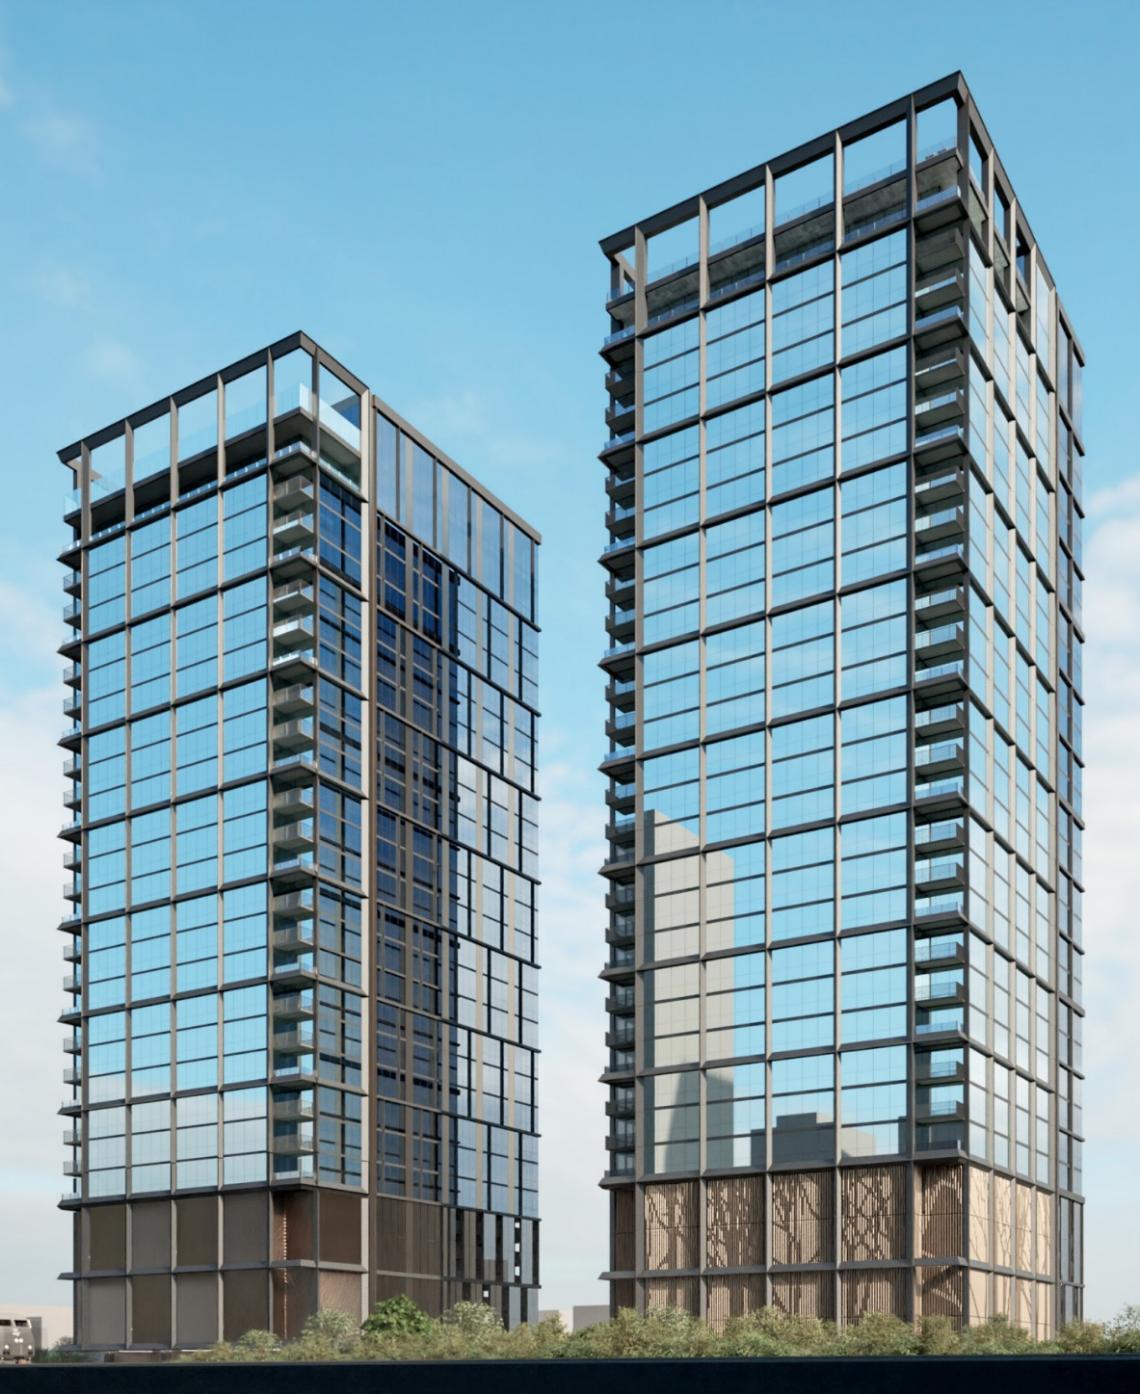 Plan Commission will review 400 N. Elizabeth | Urbanize Chicago